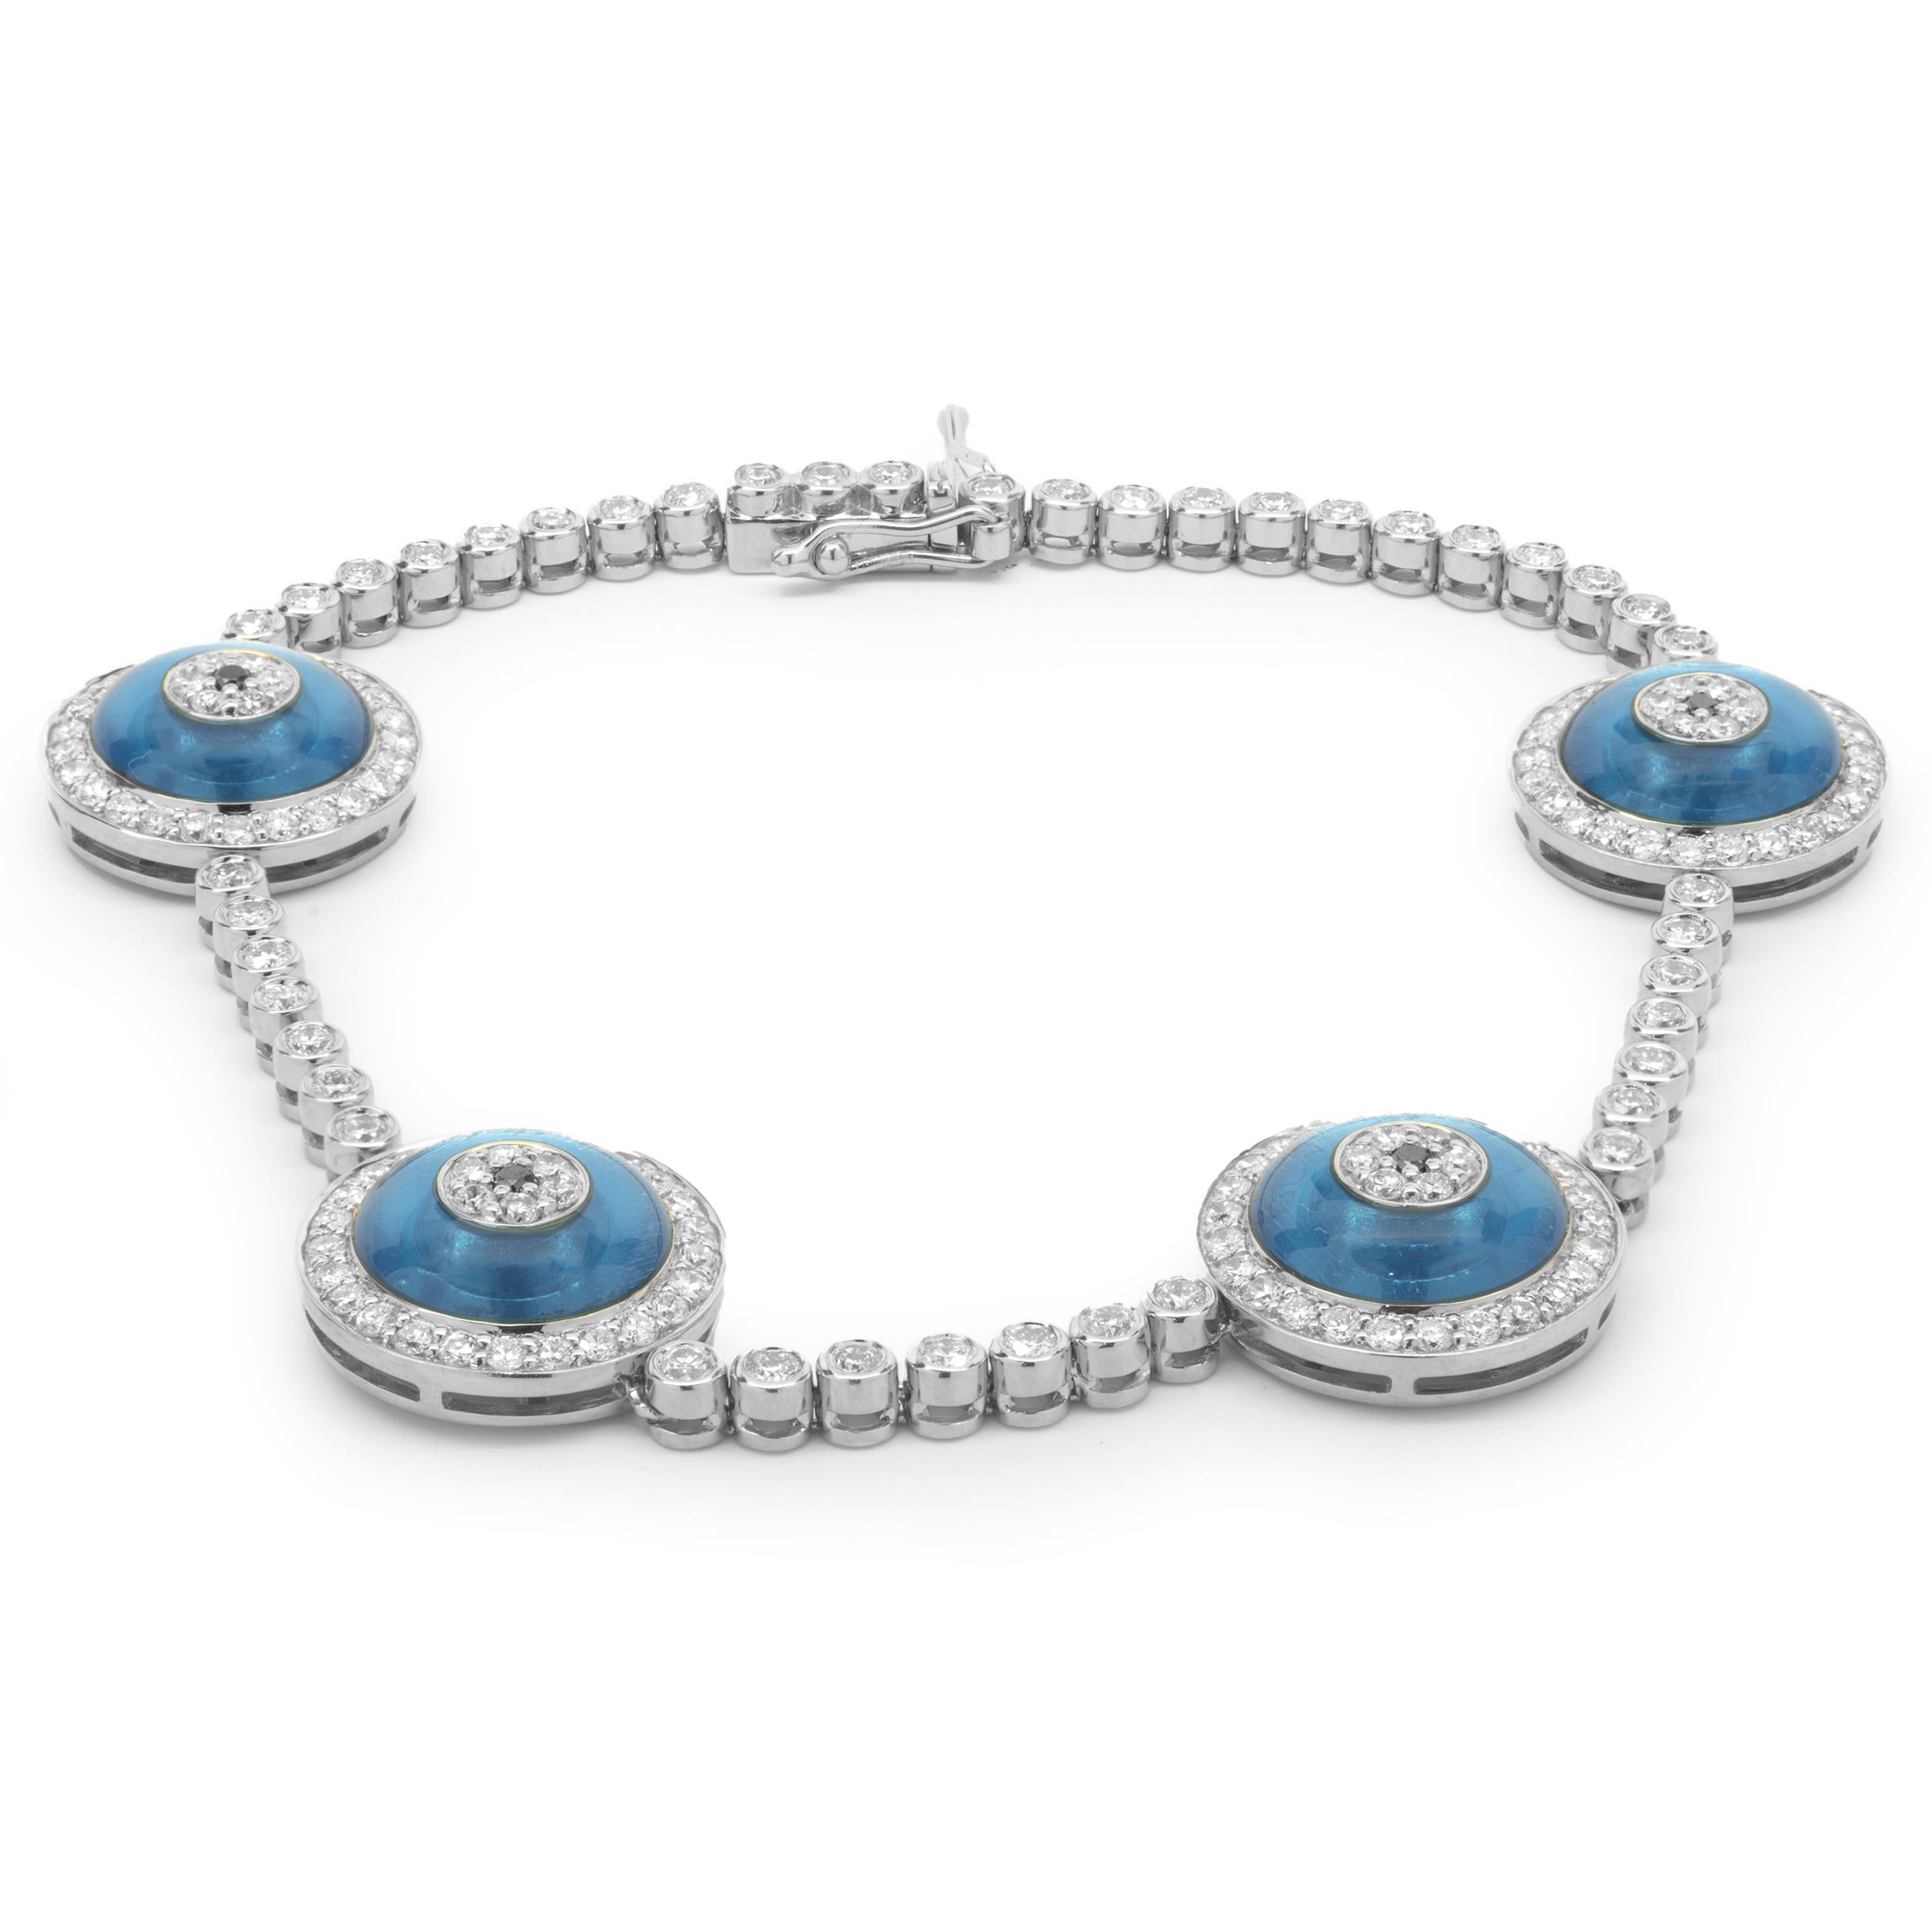 Designer: custom
Material: 18K white gold
Diamond: 172 round brilliant= 2.05cttw
Color: G 
Clarity: VS
Dimensions: bracelet will fit up to a 7-inch wrist
Weight: 14.27 grams